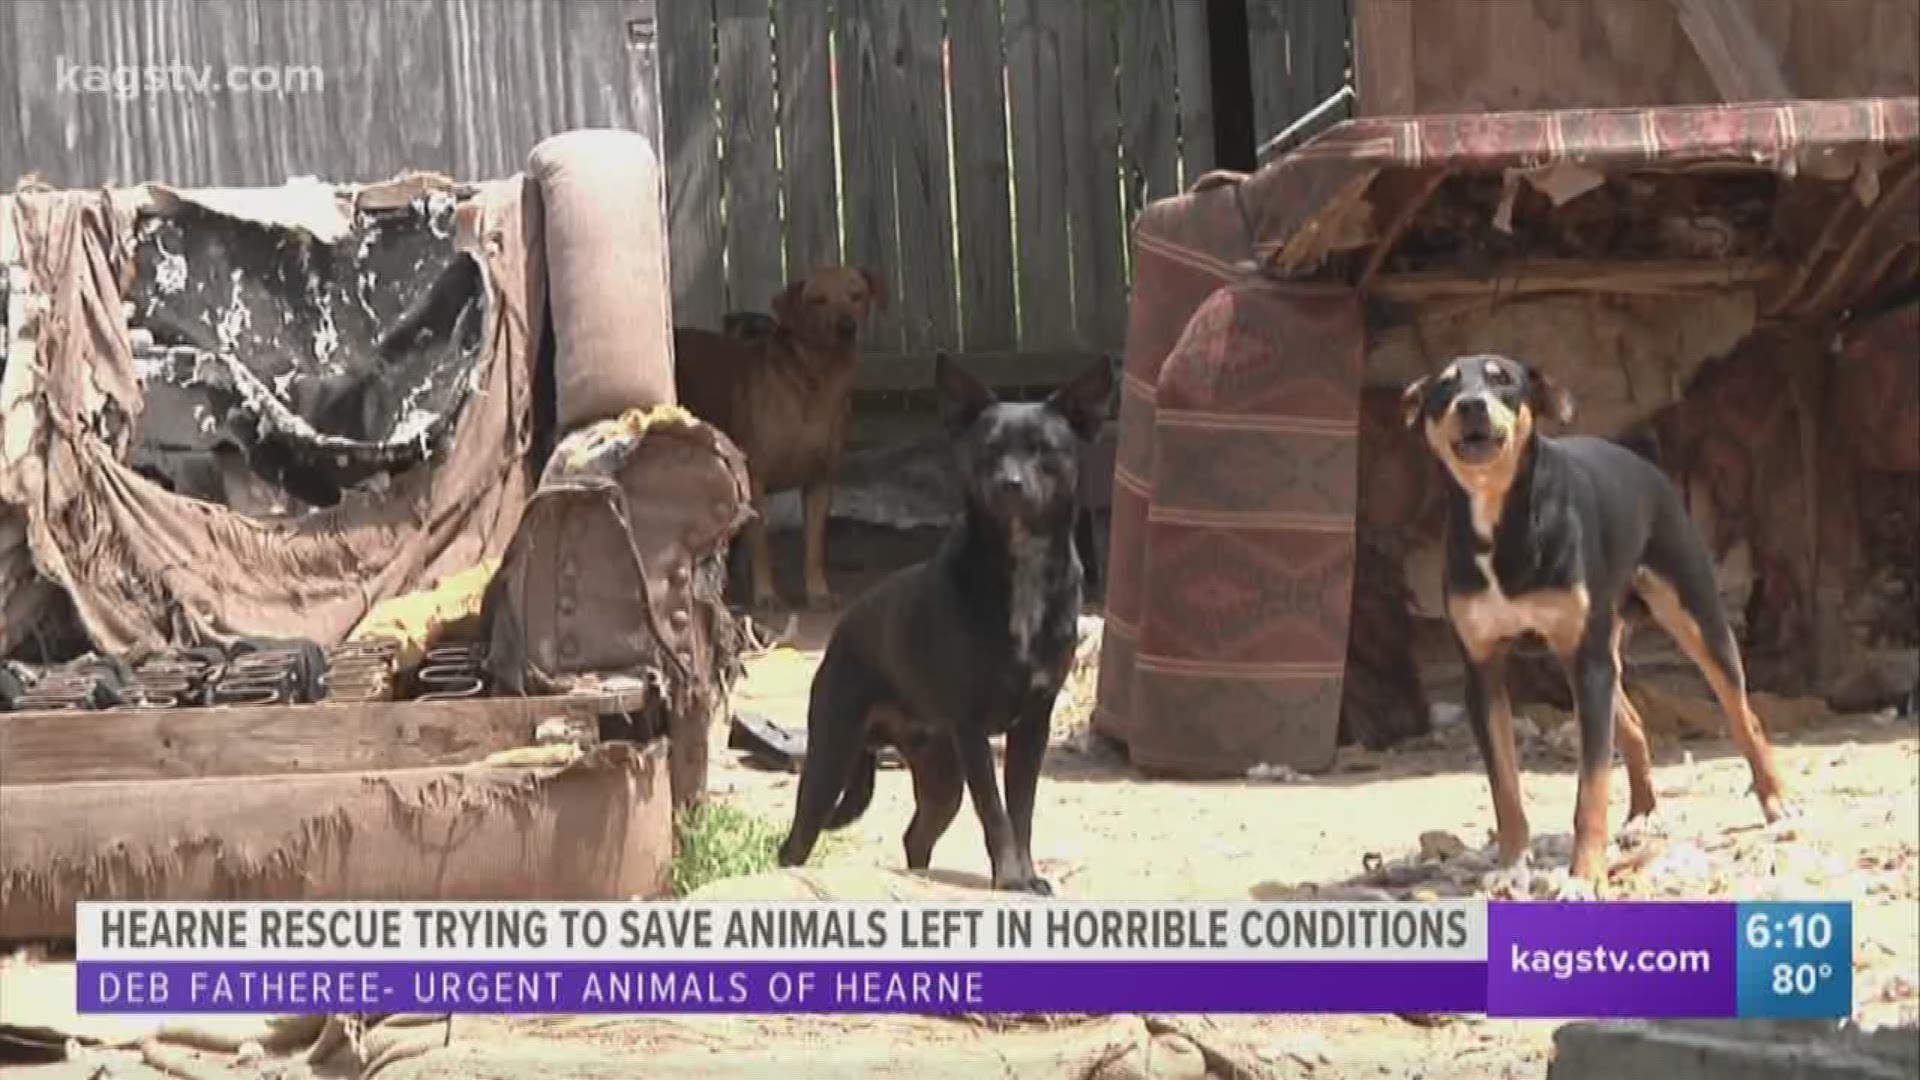 Thirty dogs were found to be living in horrible conditions after their owner died last week in Hearne. A local rescue stepped in and saved some of the dogs, but there are still many left in need of help.